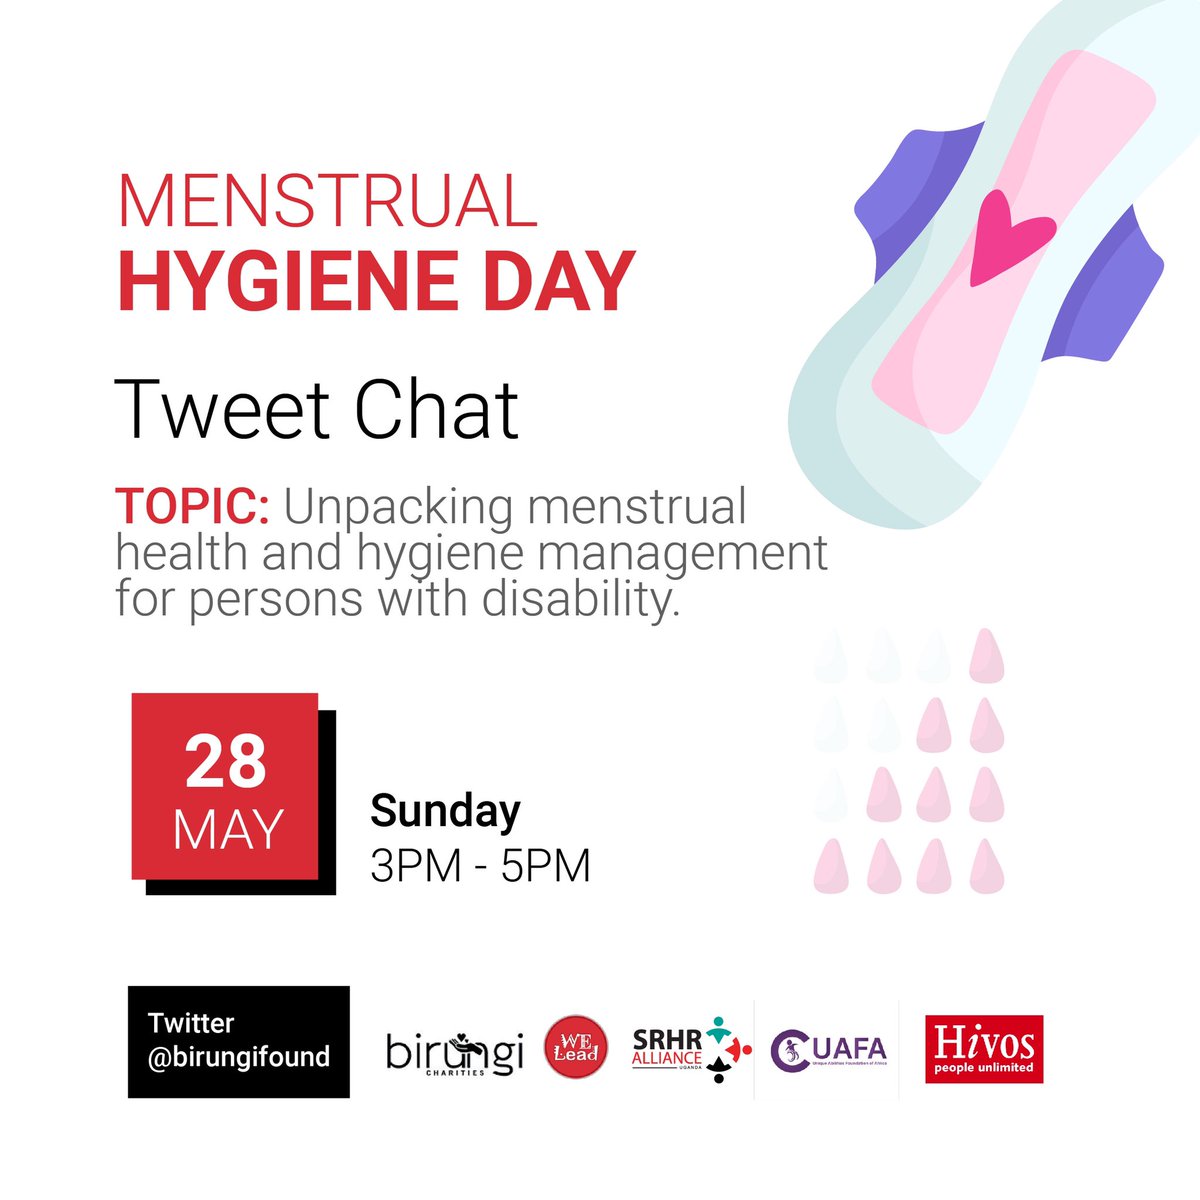 Today, millions of women and girls around the world are stigmatised, excluded and discriminated against simply because they menstruate. It’s even worse for those with disabilities.

Join the tweet chat by @BirungiFound and her partners.

#HealthyPeriods4Her  
#WeLeadOurSRHR